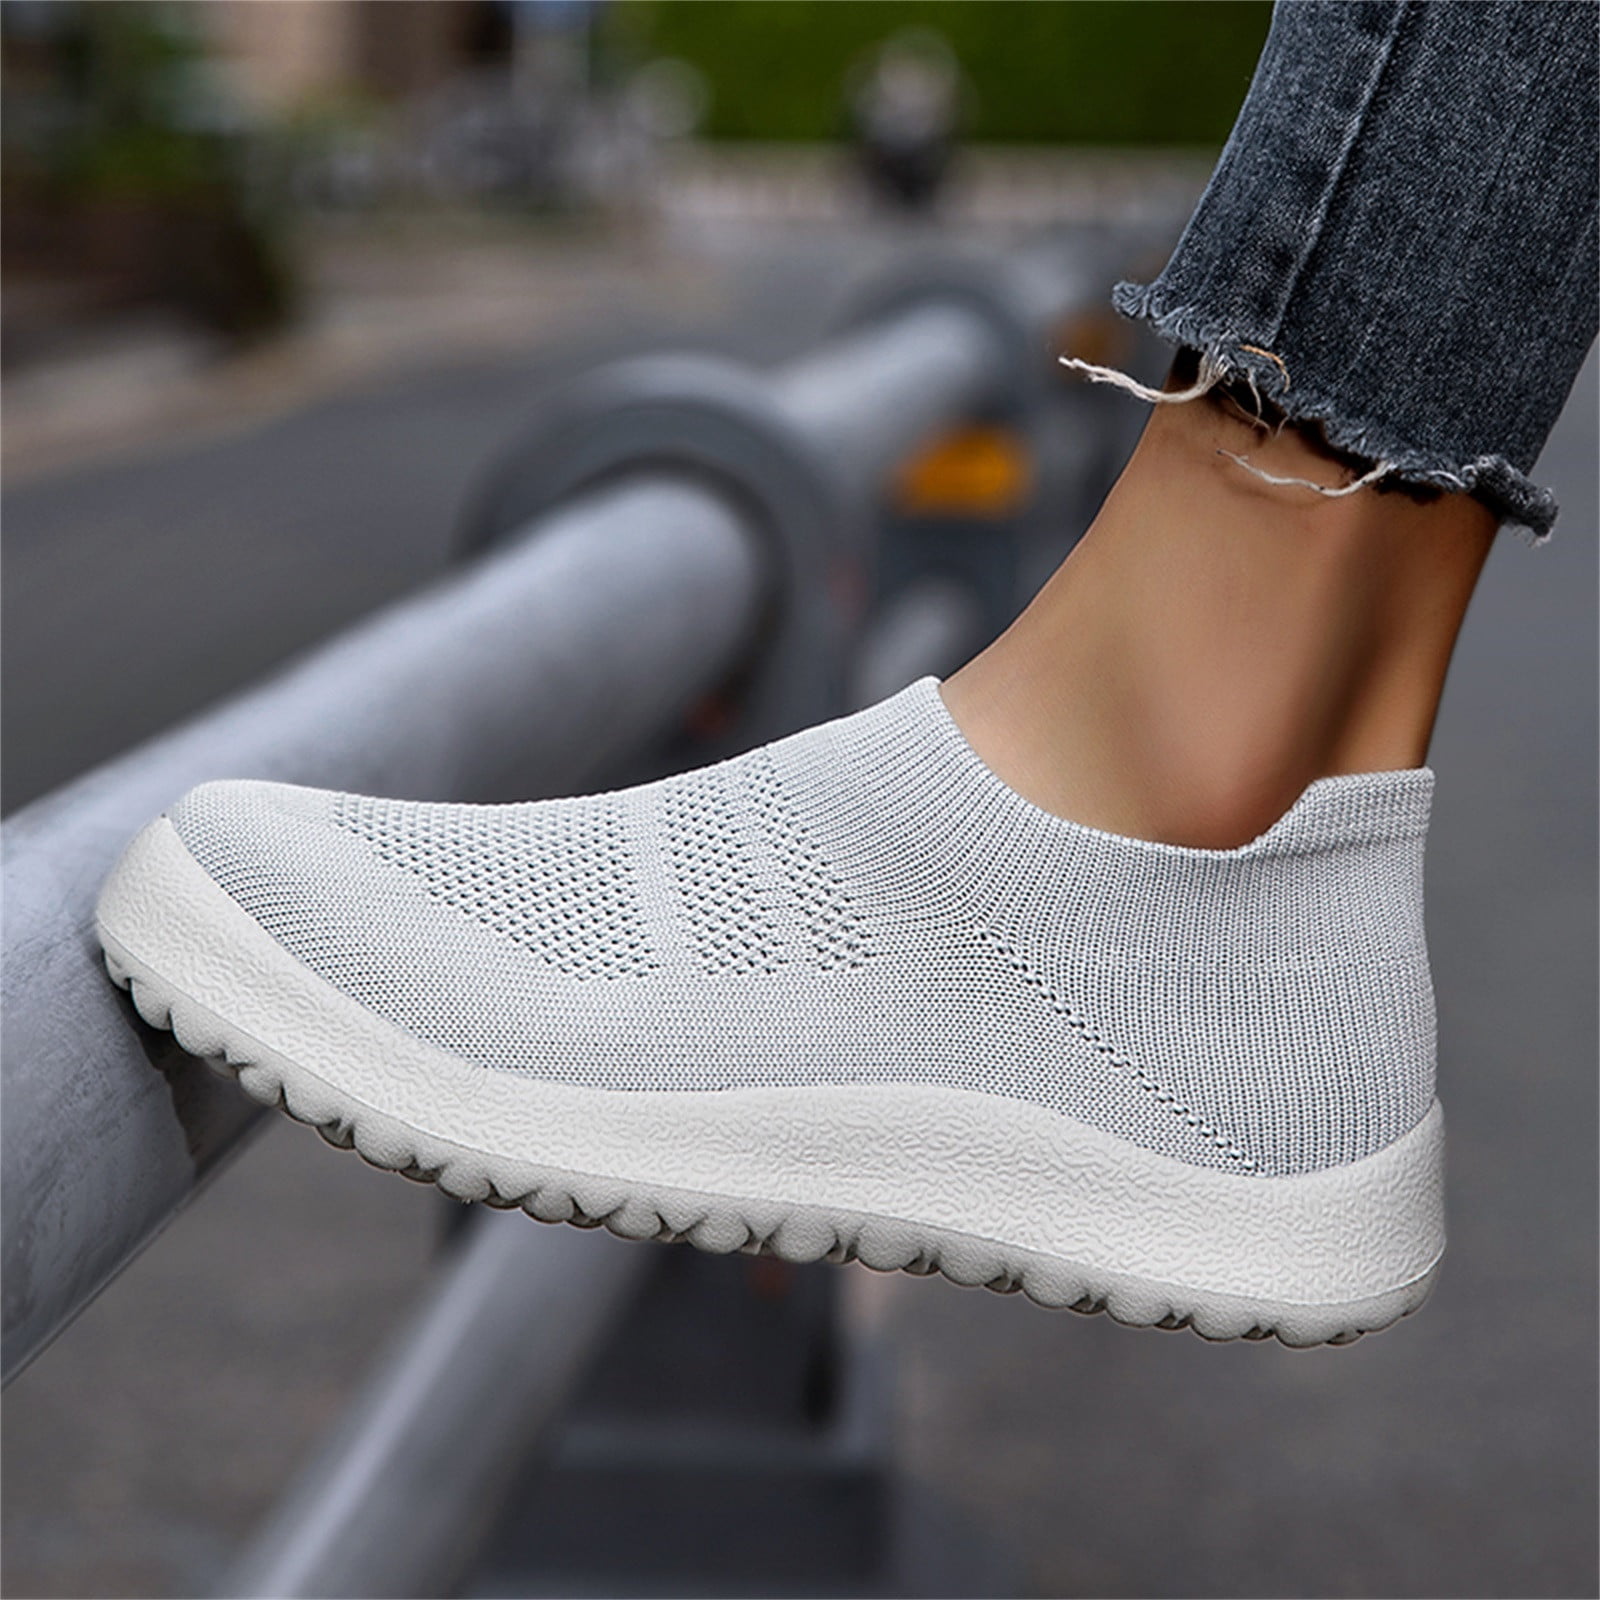 Cathalem Womens Sneaker Fashion Spring And Summer Women Sports Shoes Flat  Bottom Lightweight Slip Slip on Sneaker Shoes for Women Grey 6.5 